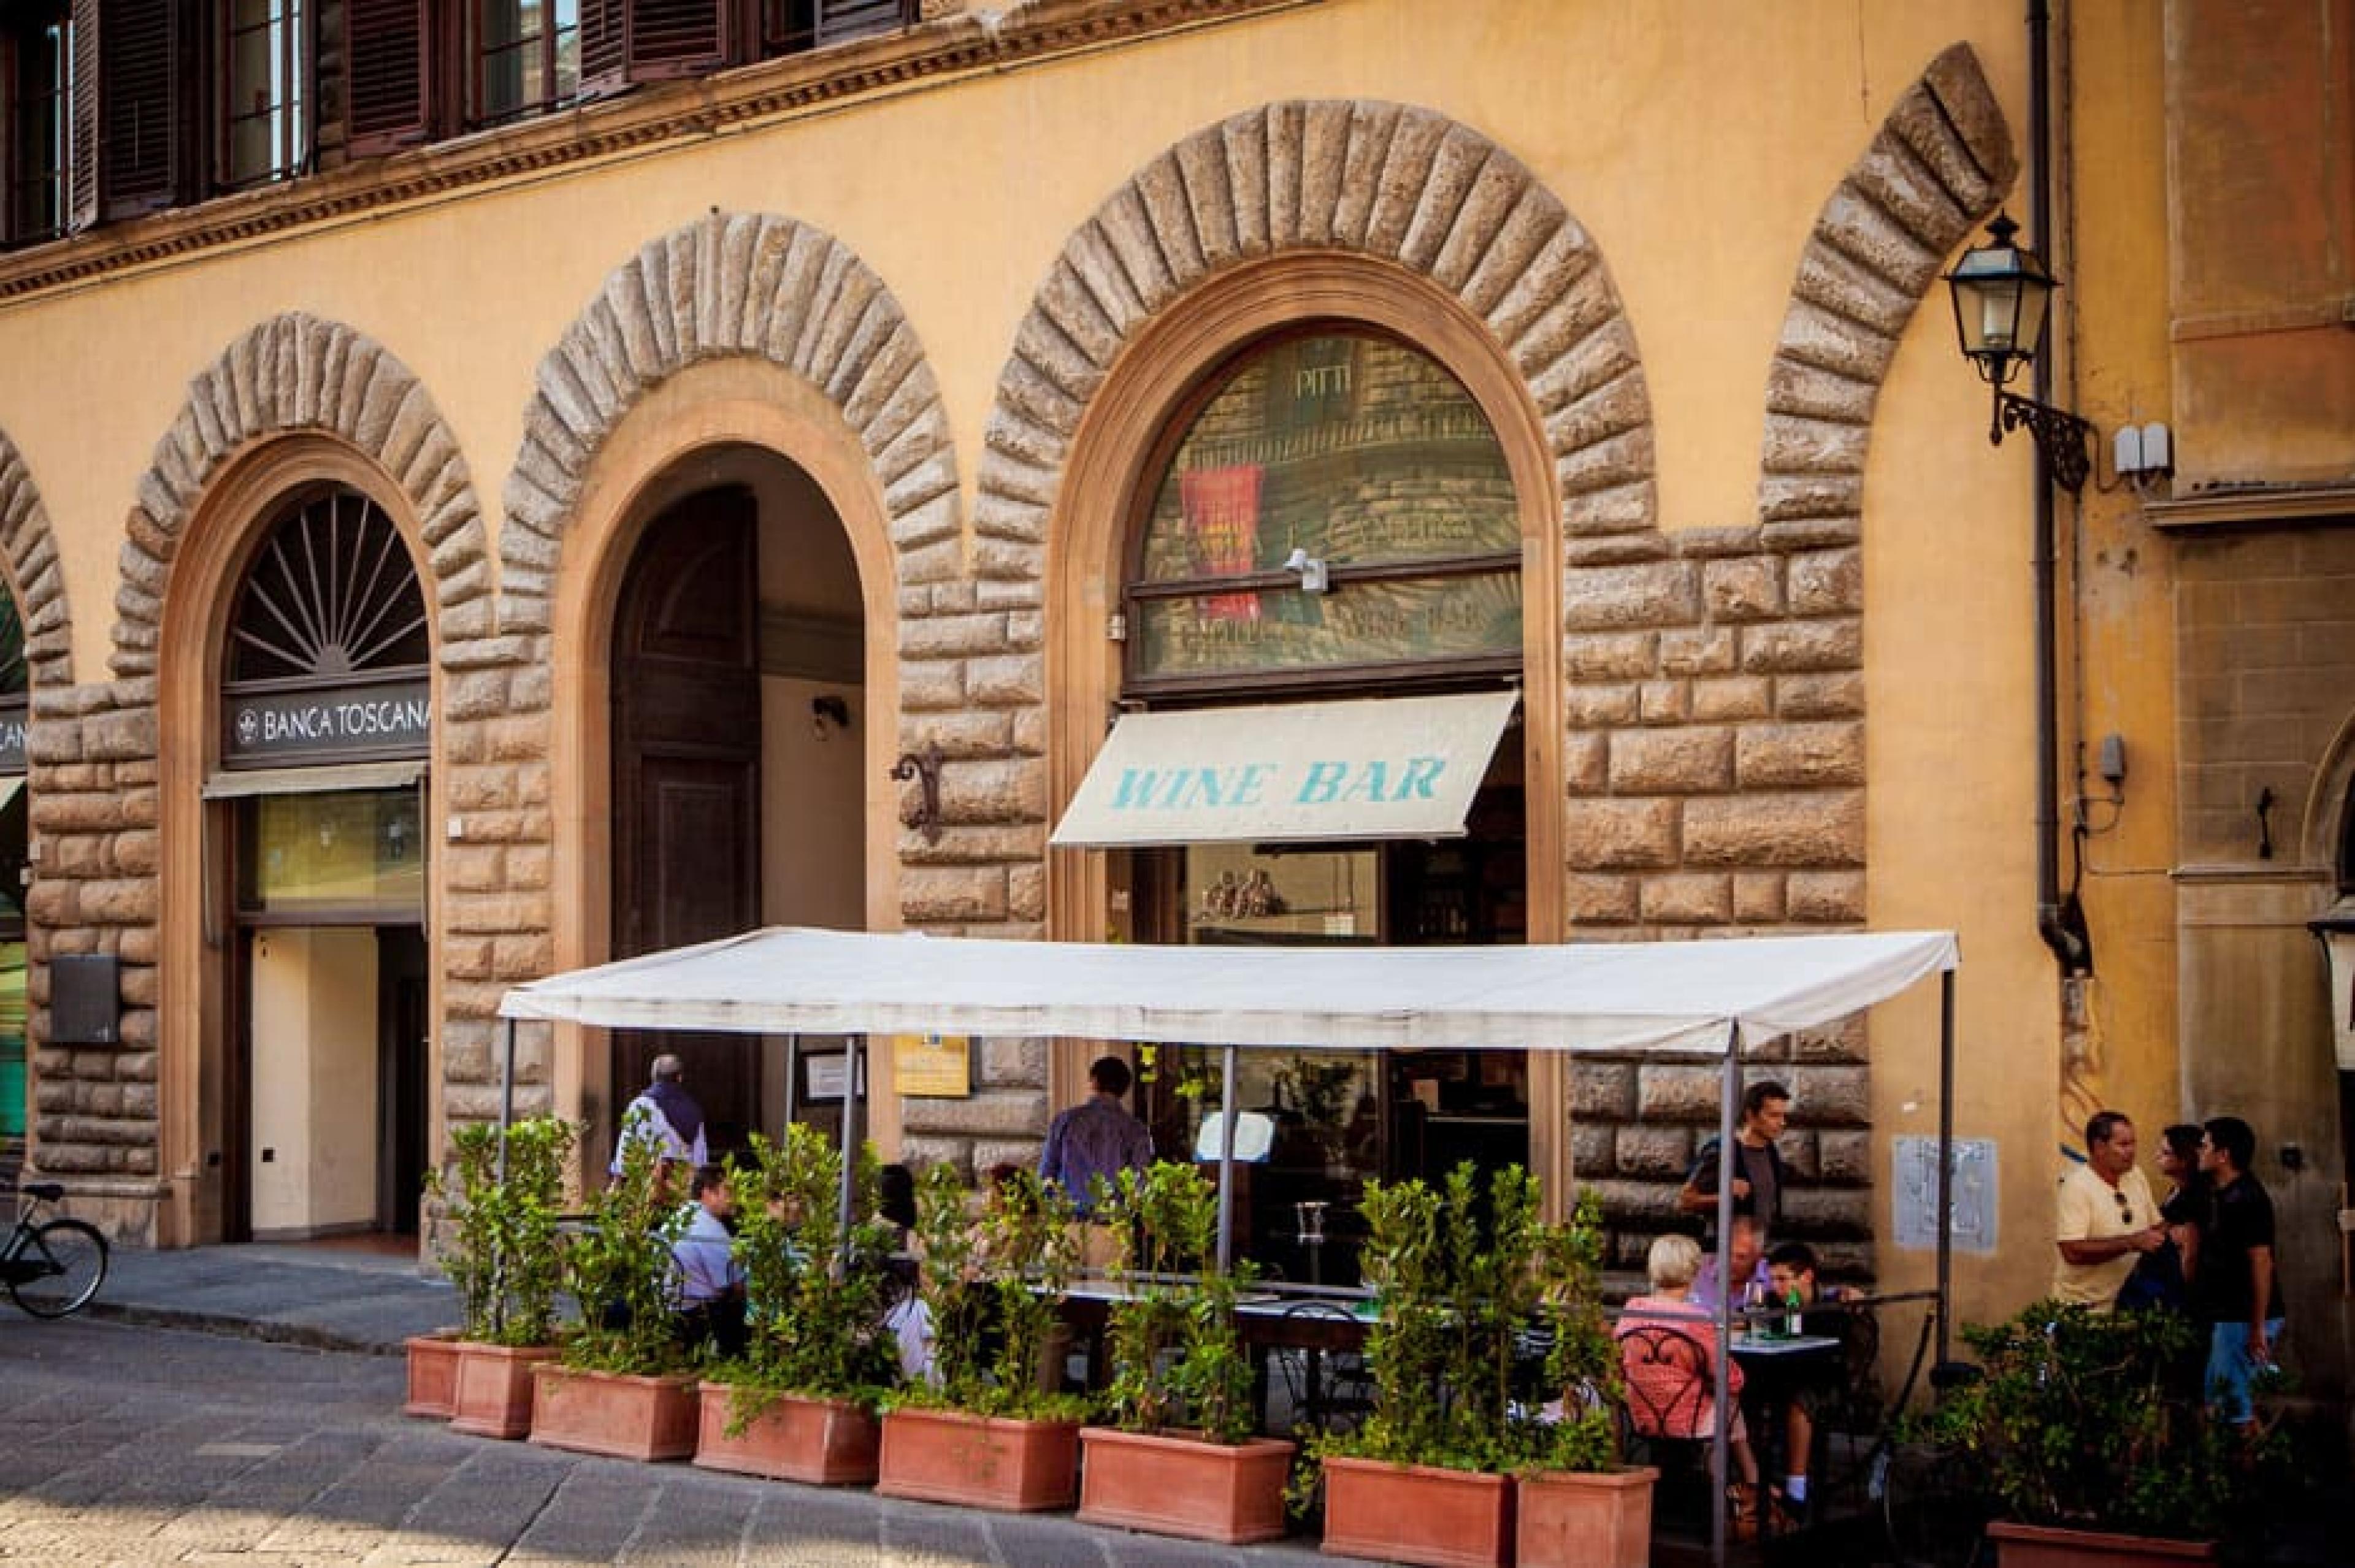 Exterior View - Enoteca Pitti Gola e Cantina,  Florence, Italy - Photograph by Kip Roof